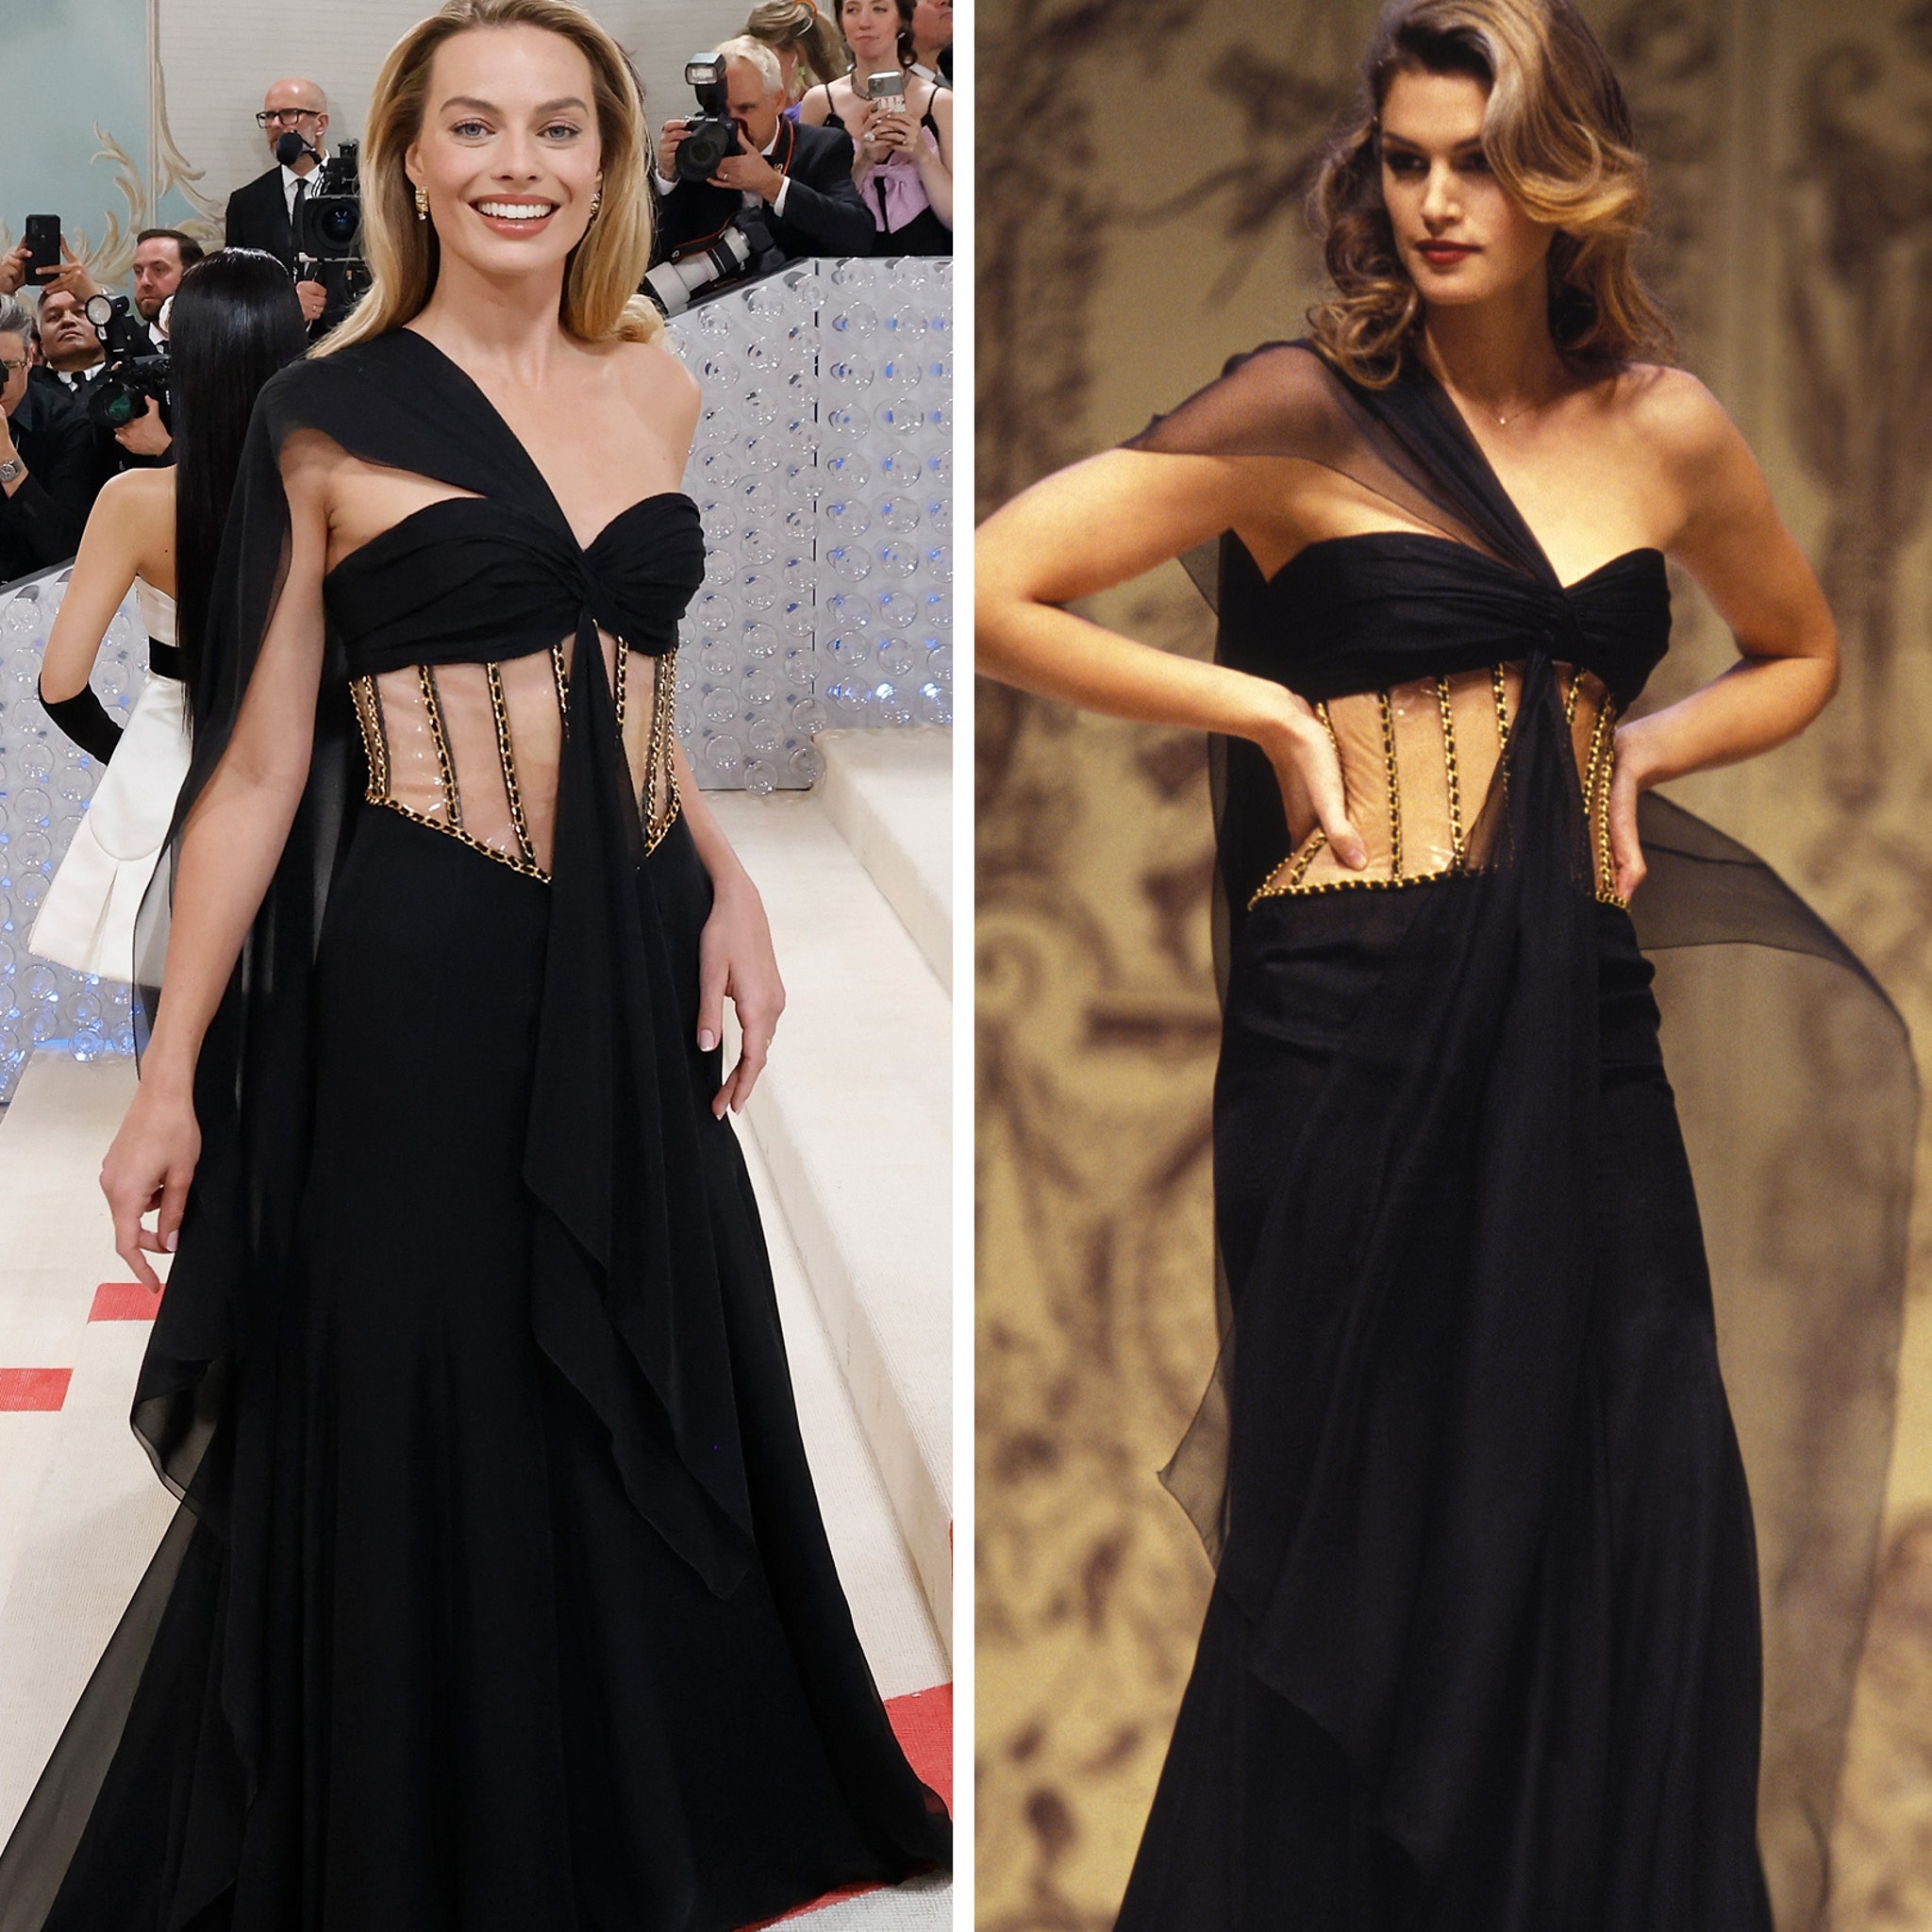 Margot Robbie Wears Replica of Cindy Crawford's 1993 Chanel Gown to Met Gala